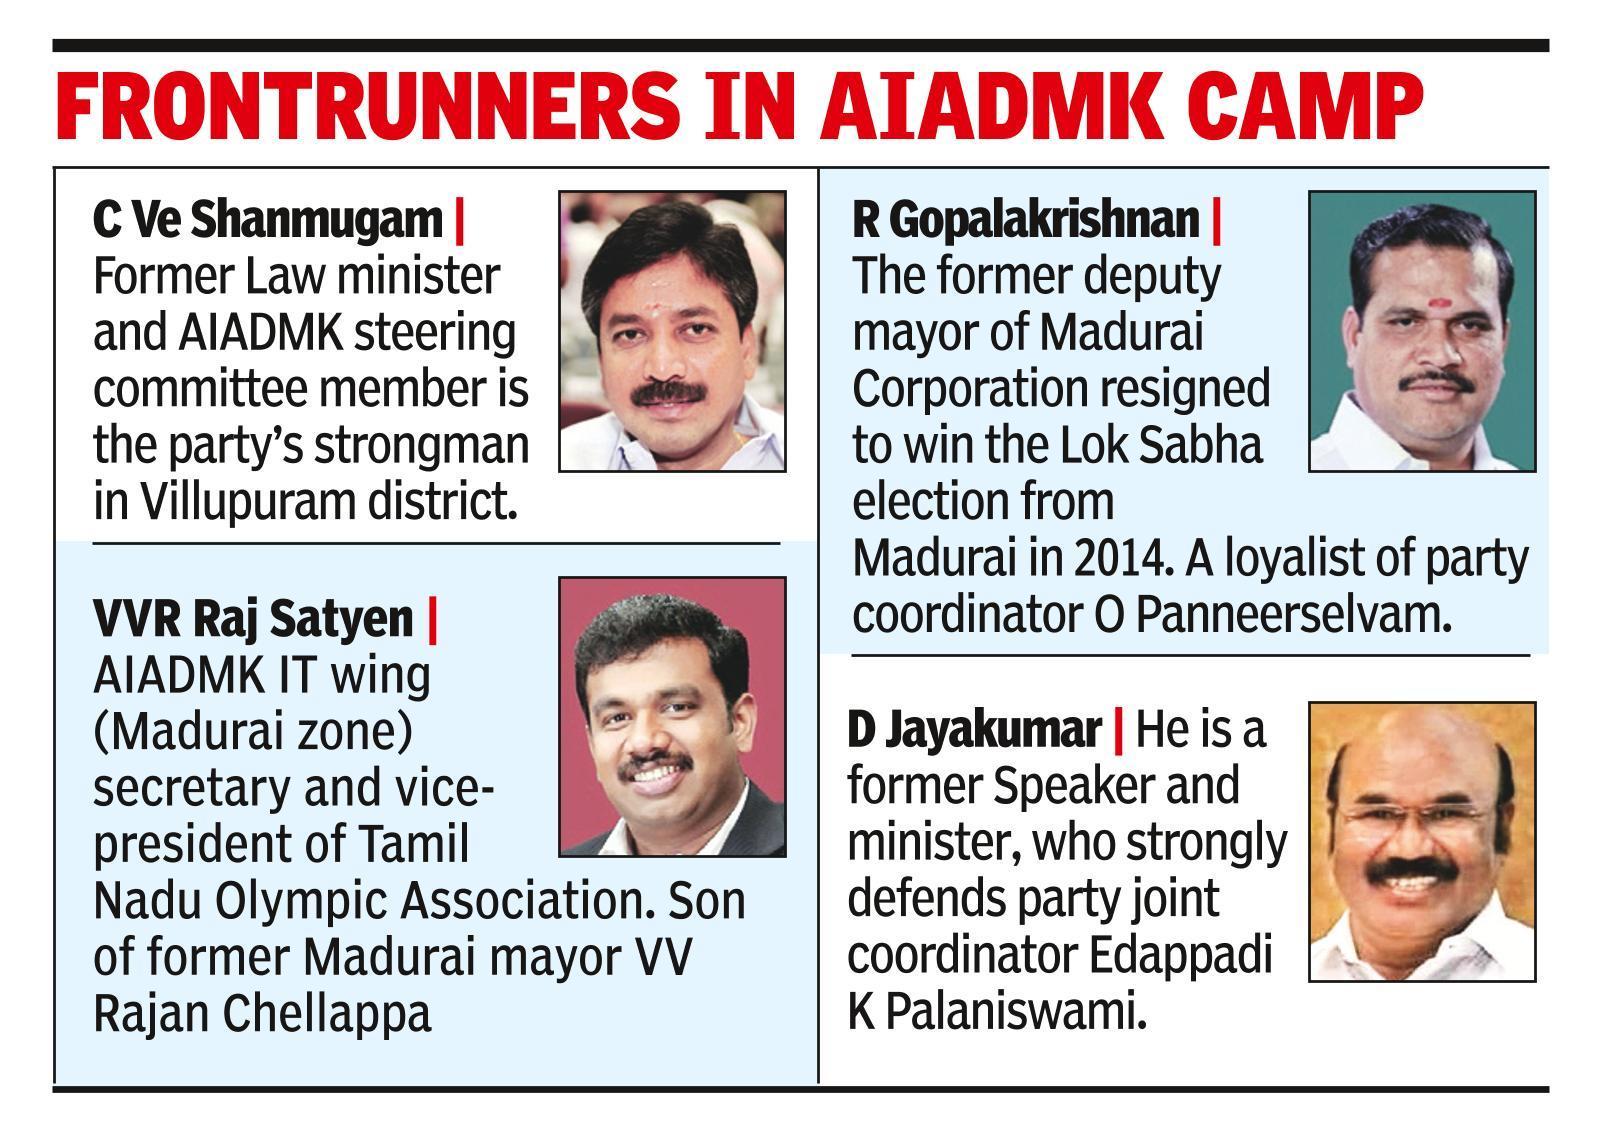 Power struggle erupts in AIADMK over RS candidature